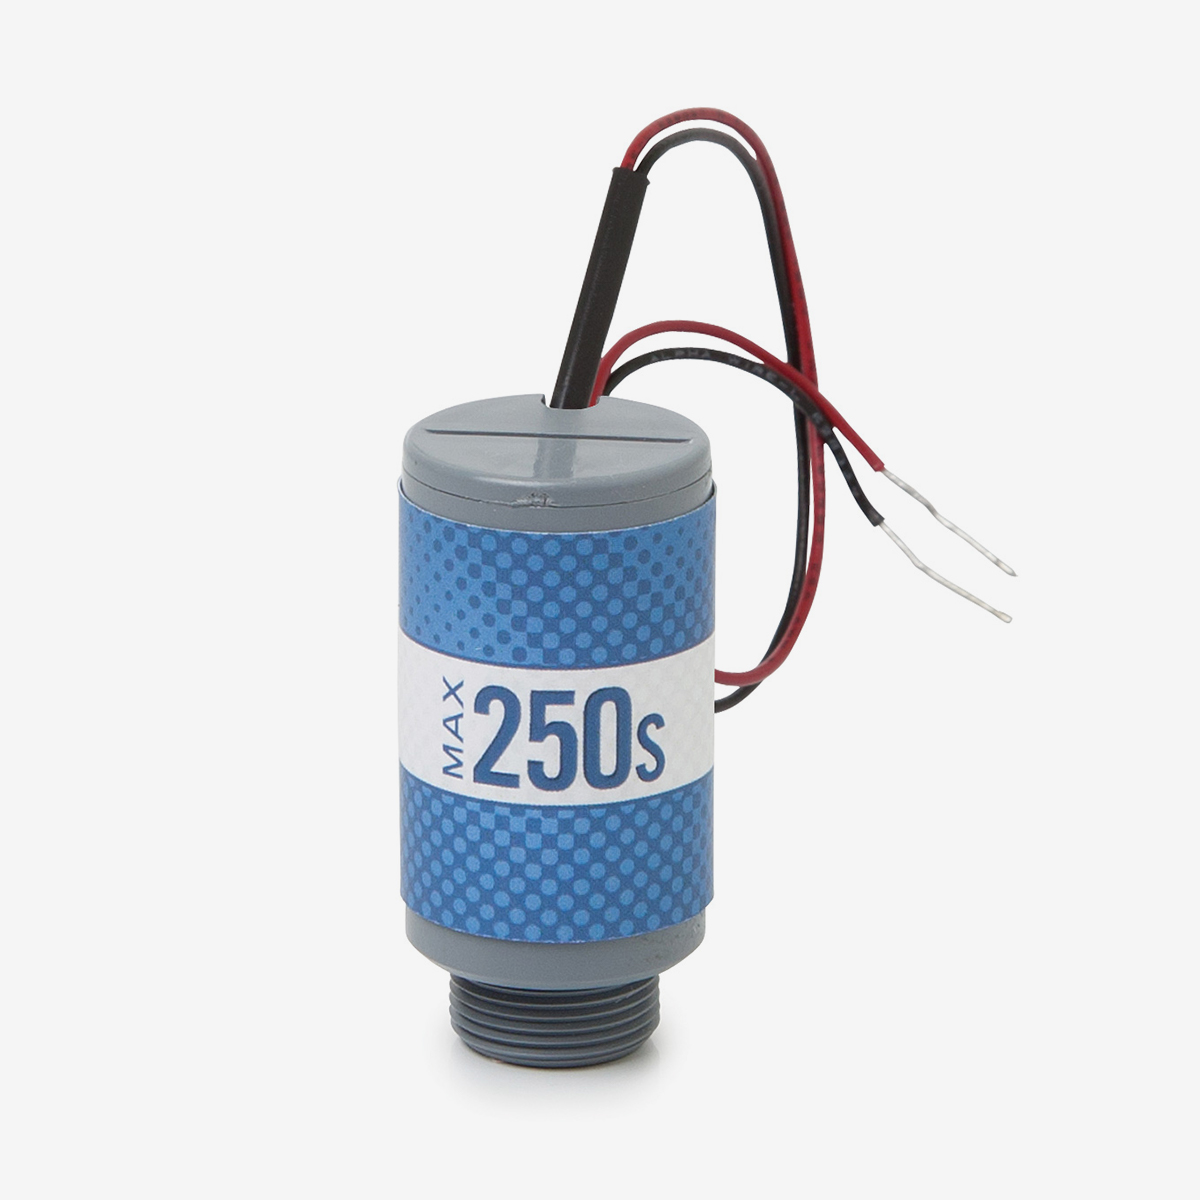 Blue and grey cylindrical Max-250s oxygen sensor on white background